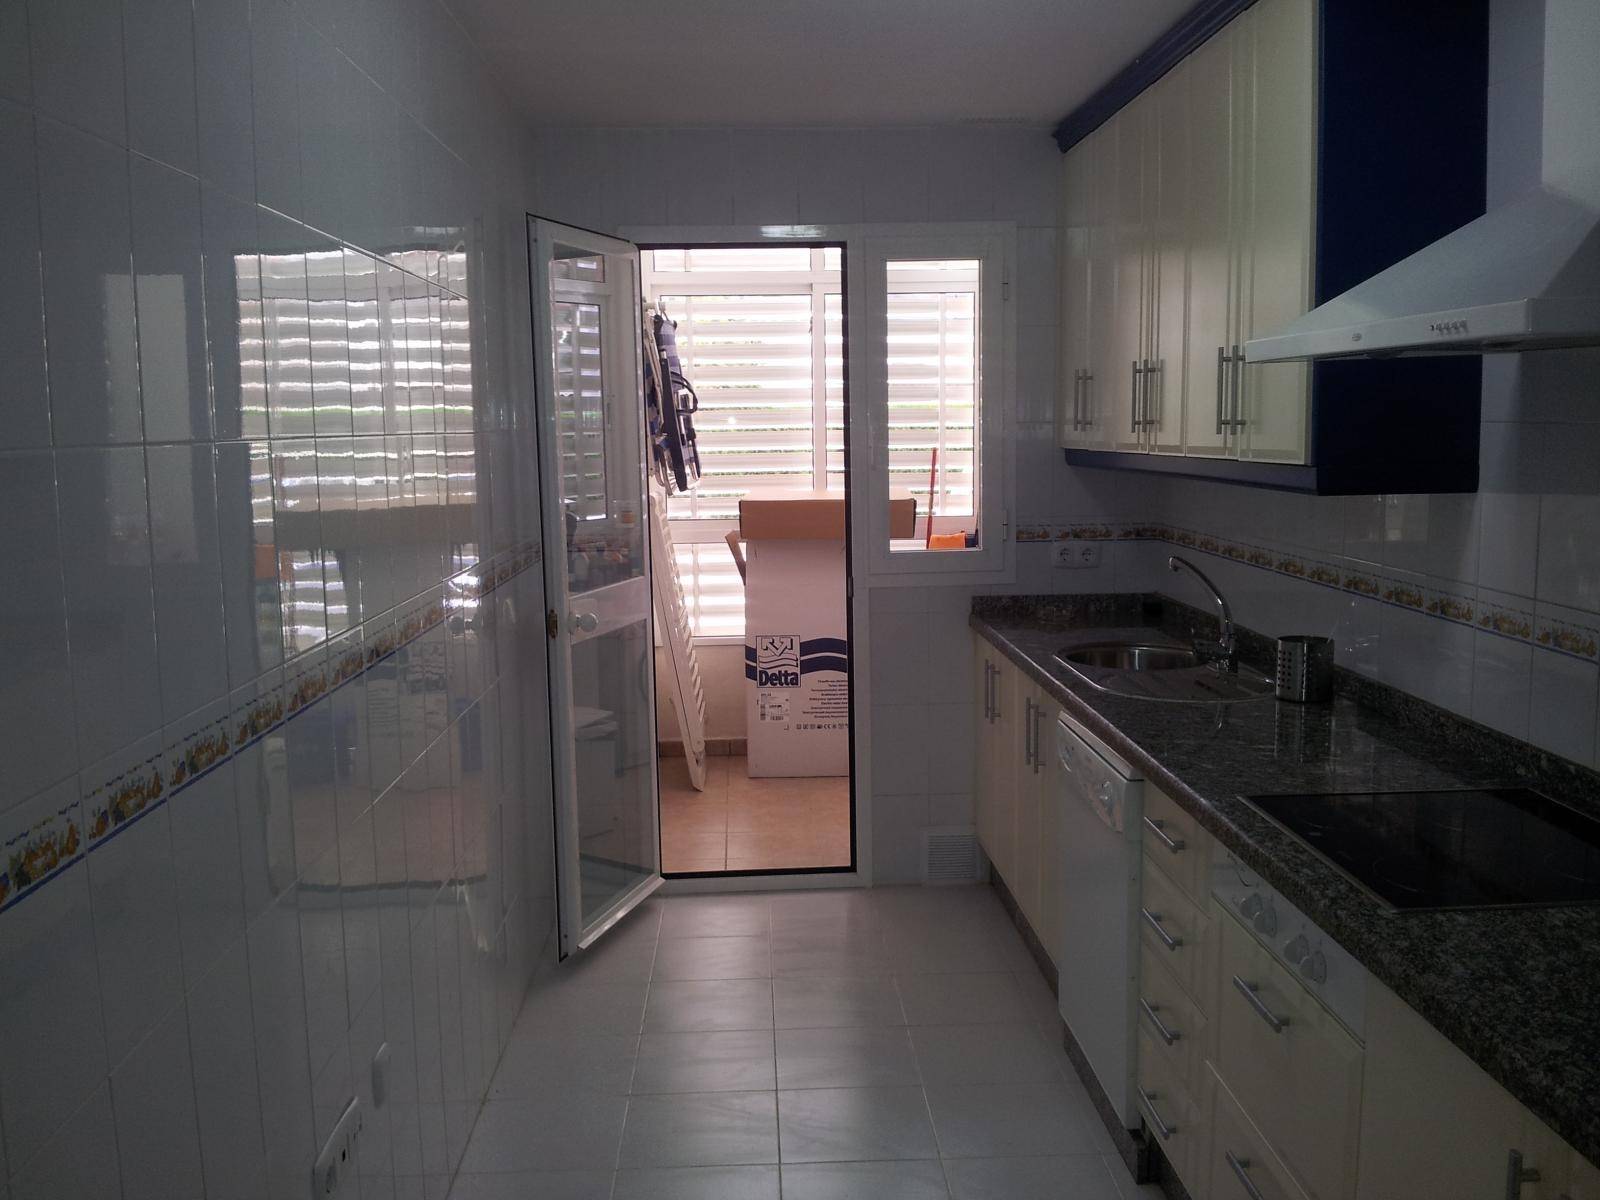 Flat for rent in Rota